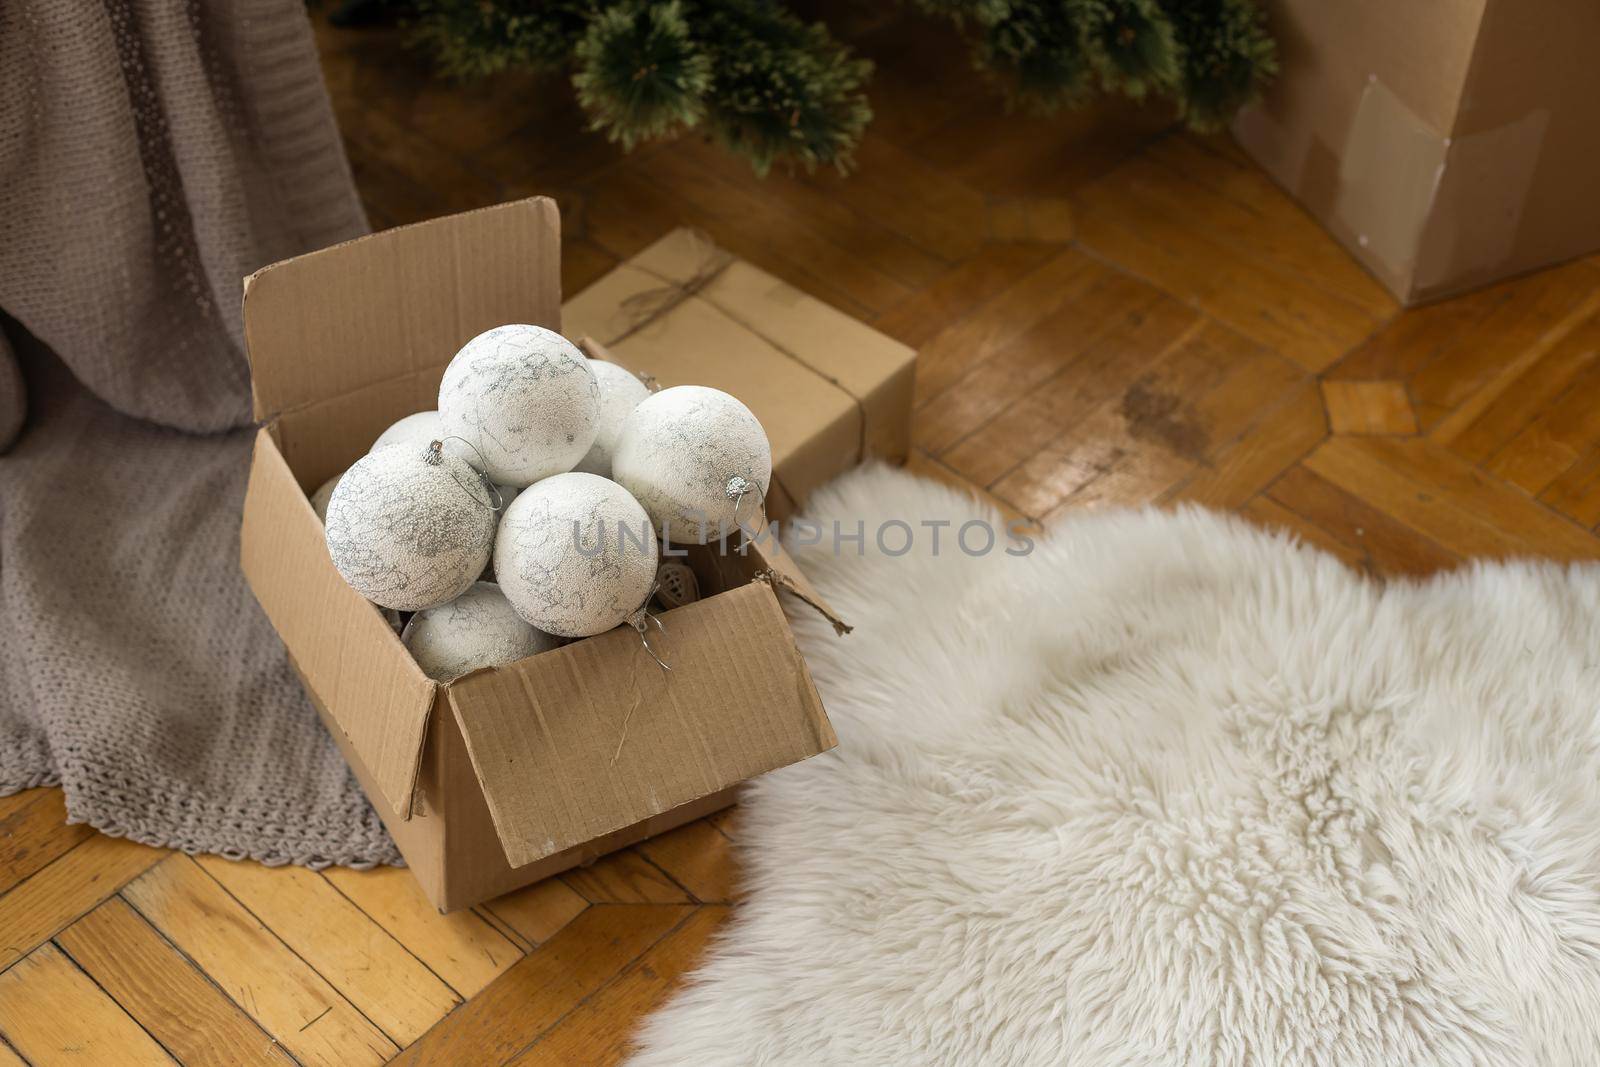 Christmas tree decorations for Christmas, winter, new year concept.